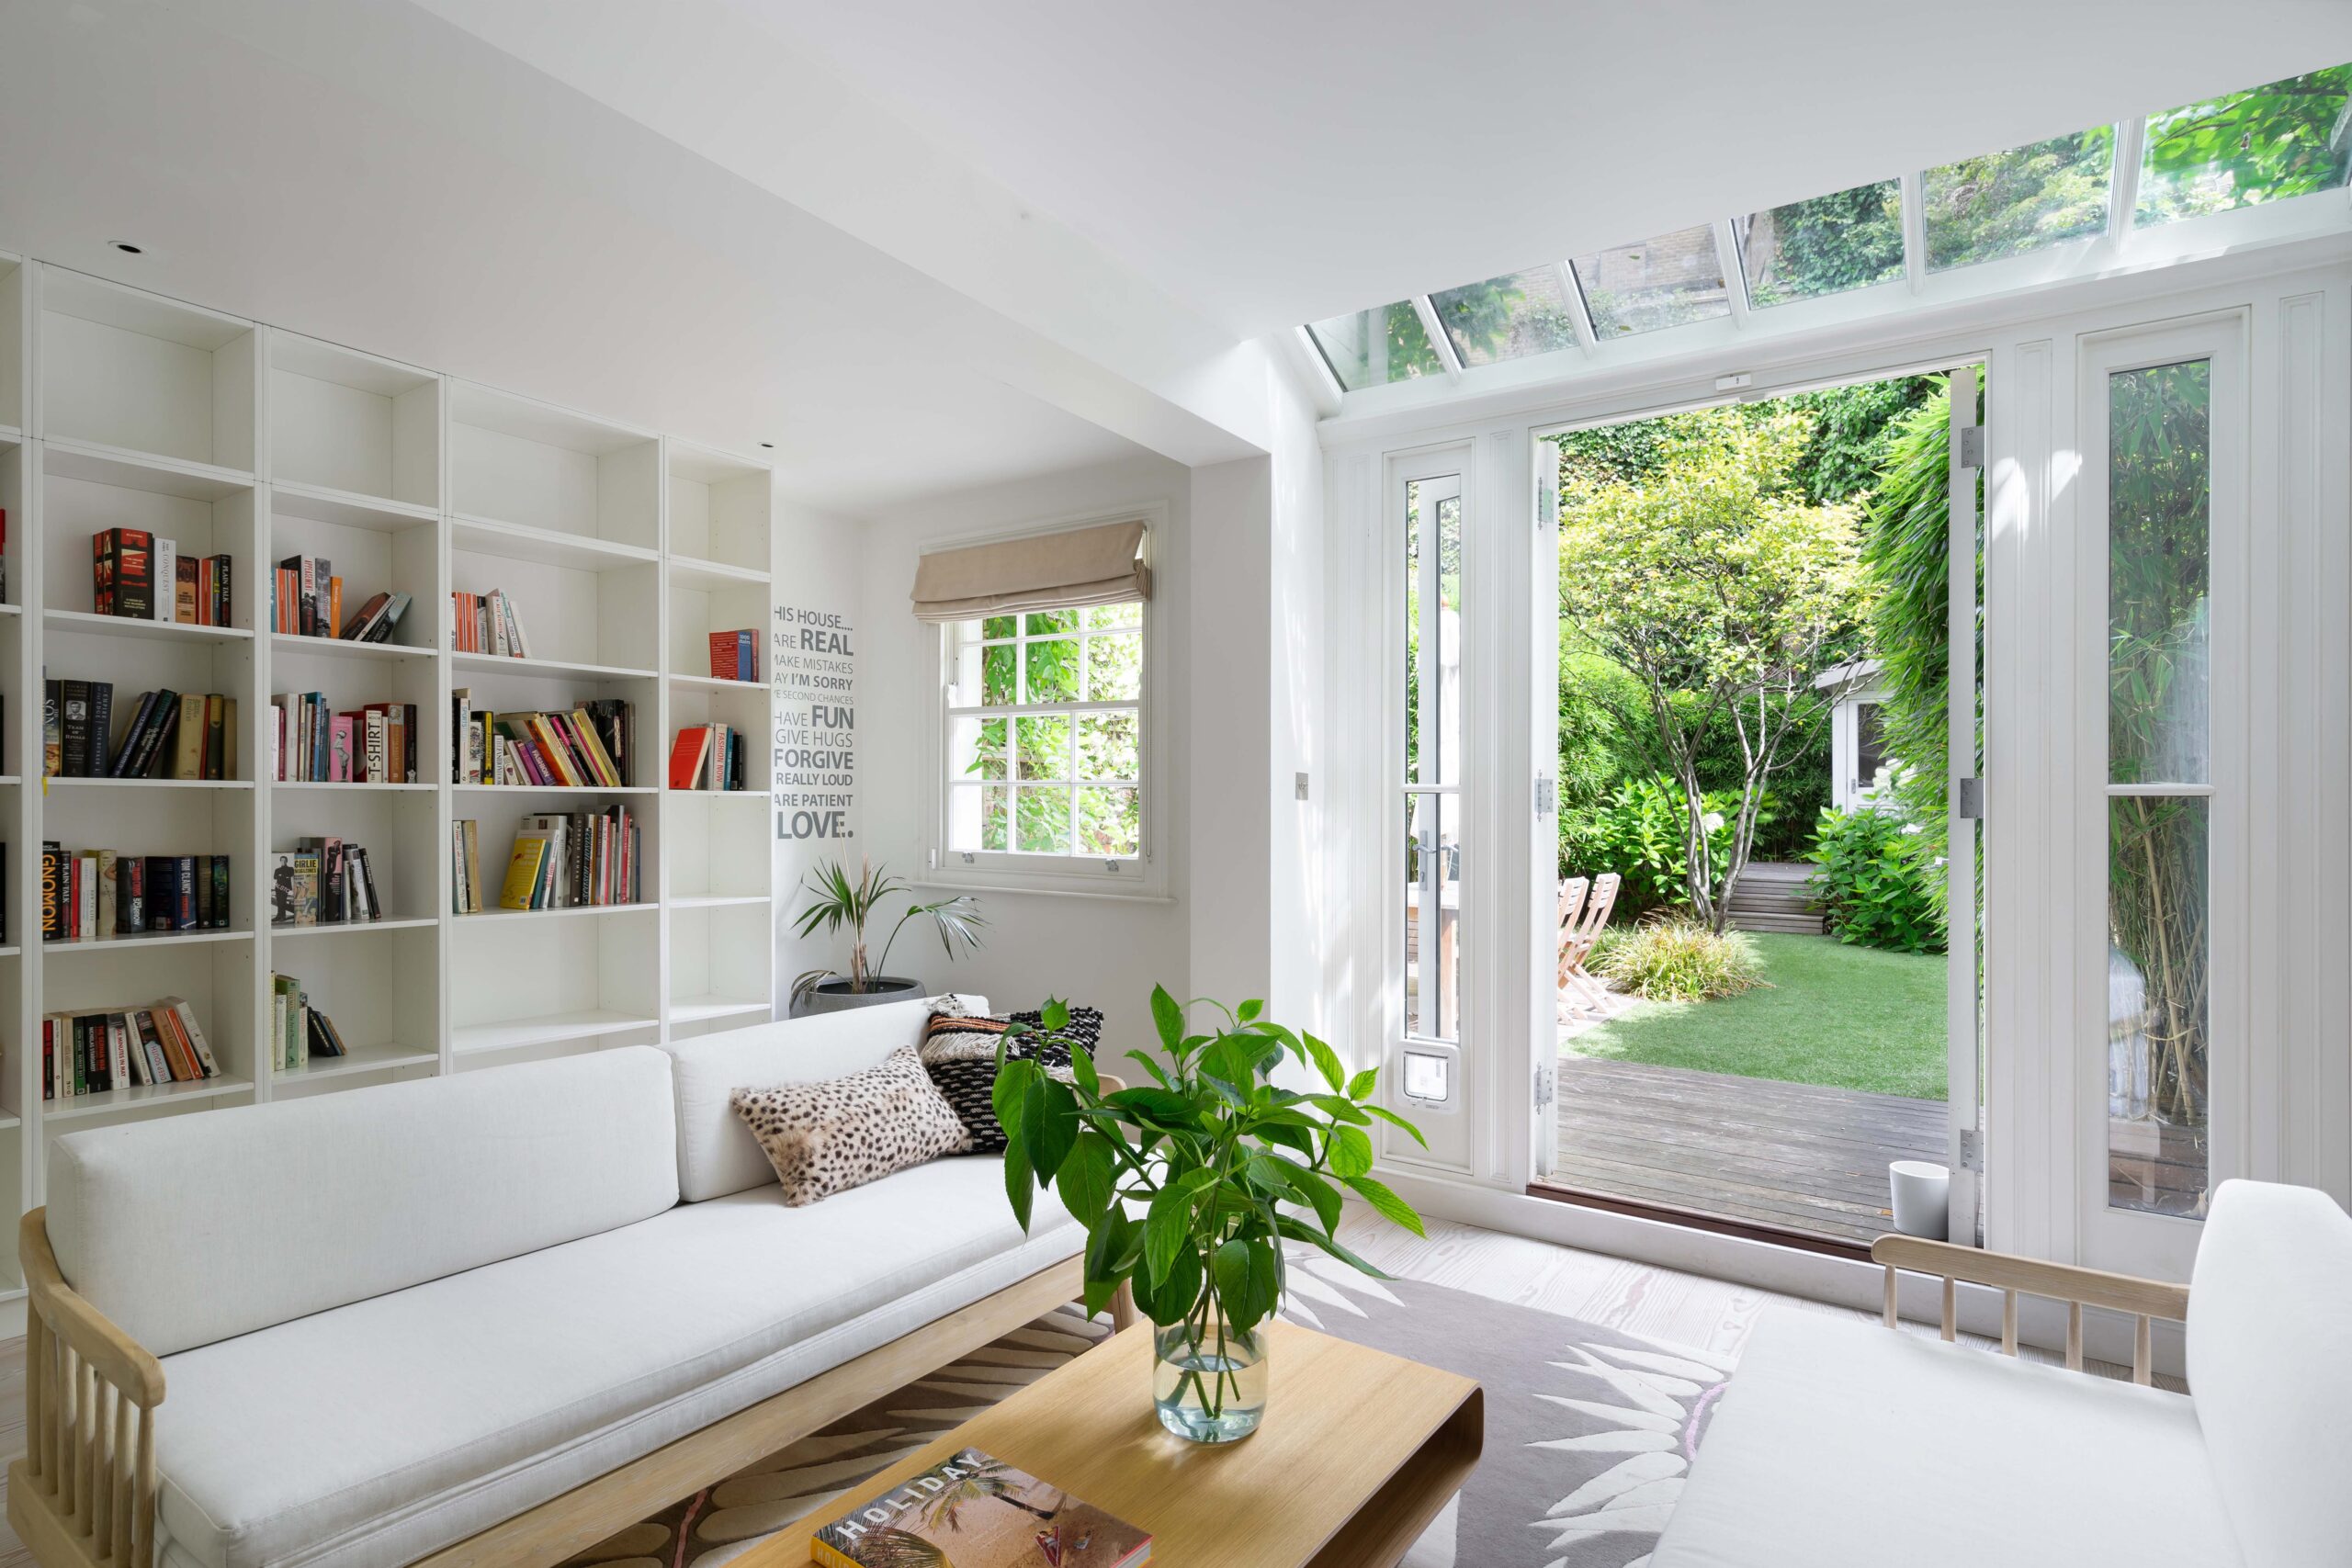 For Sale: Kensington Park Road Notting Hill W11 contemporary interior design in conservatory